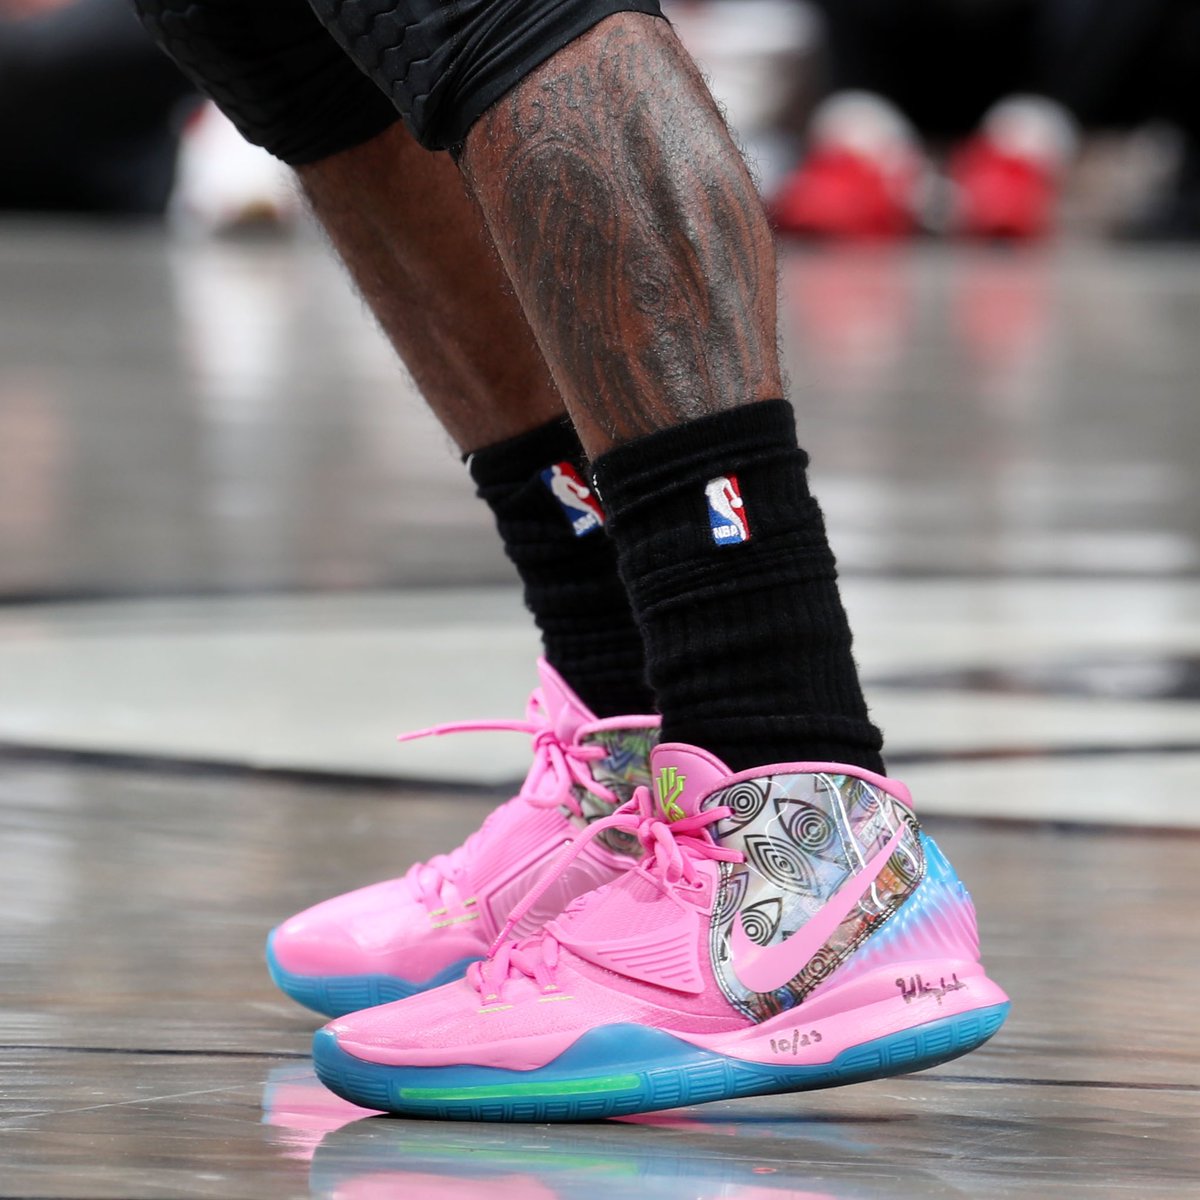 kyrie 6s pink